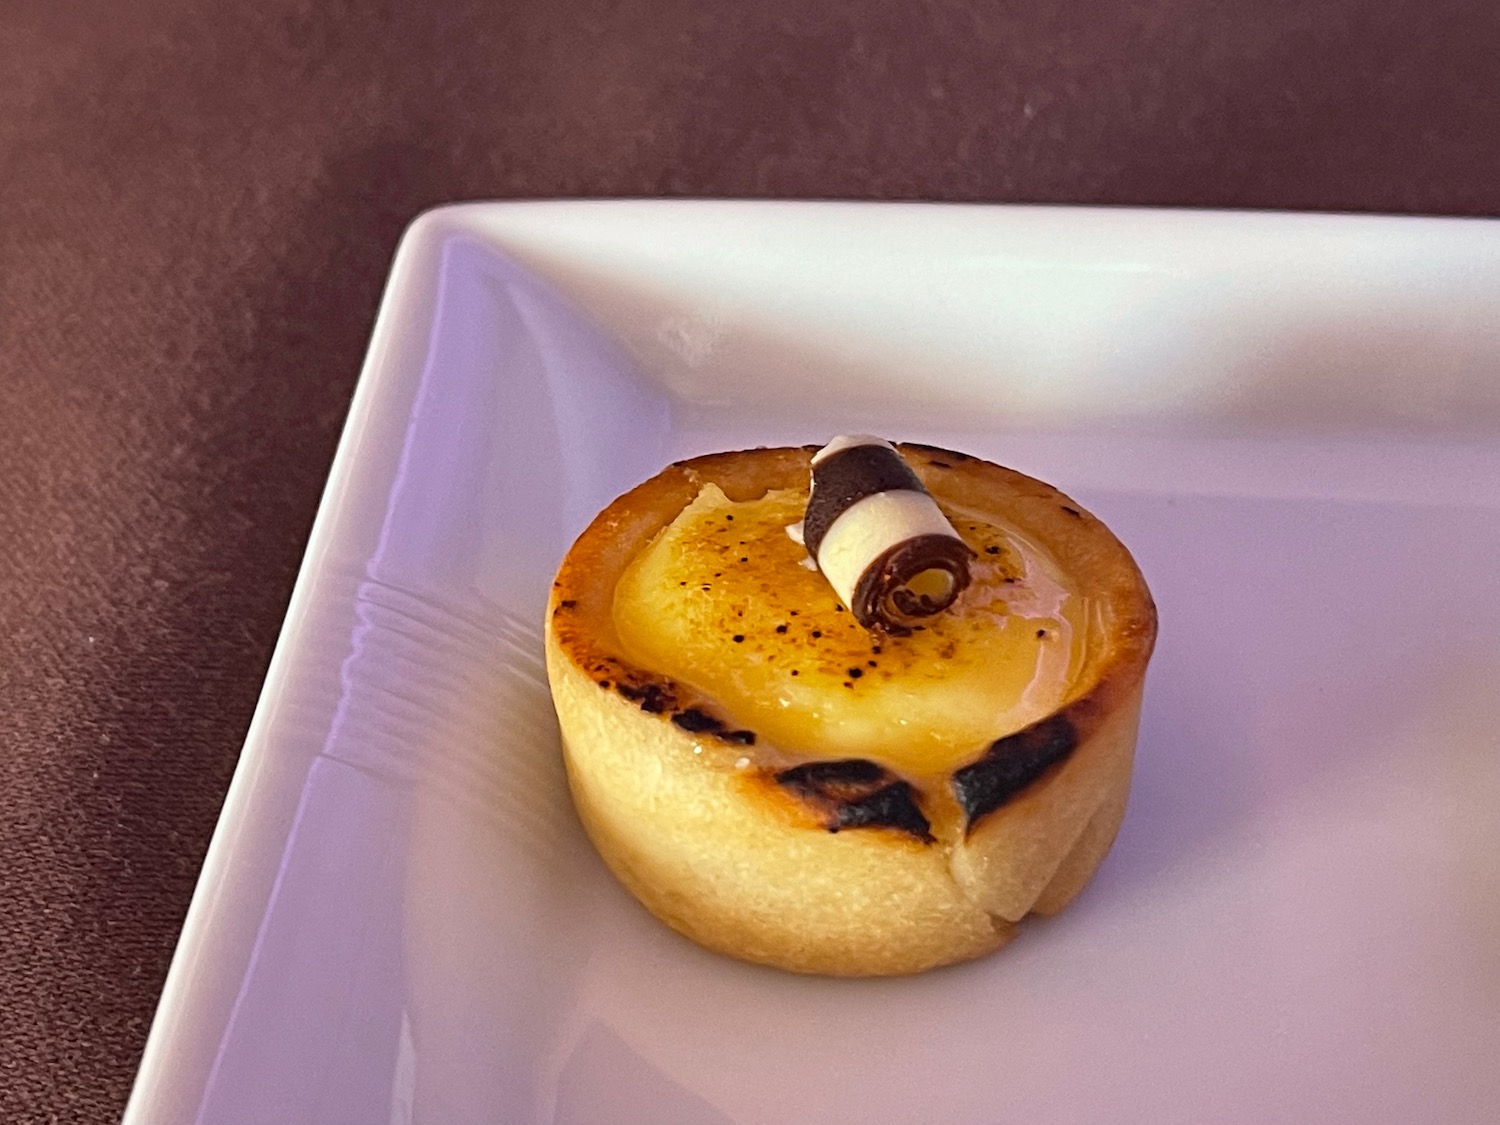 a small pastry on a plate